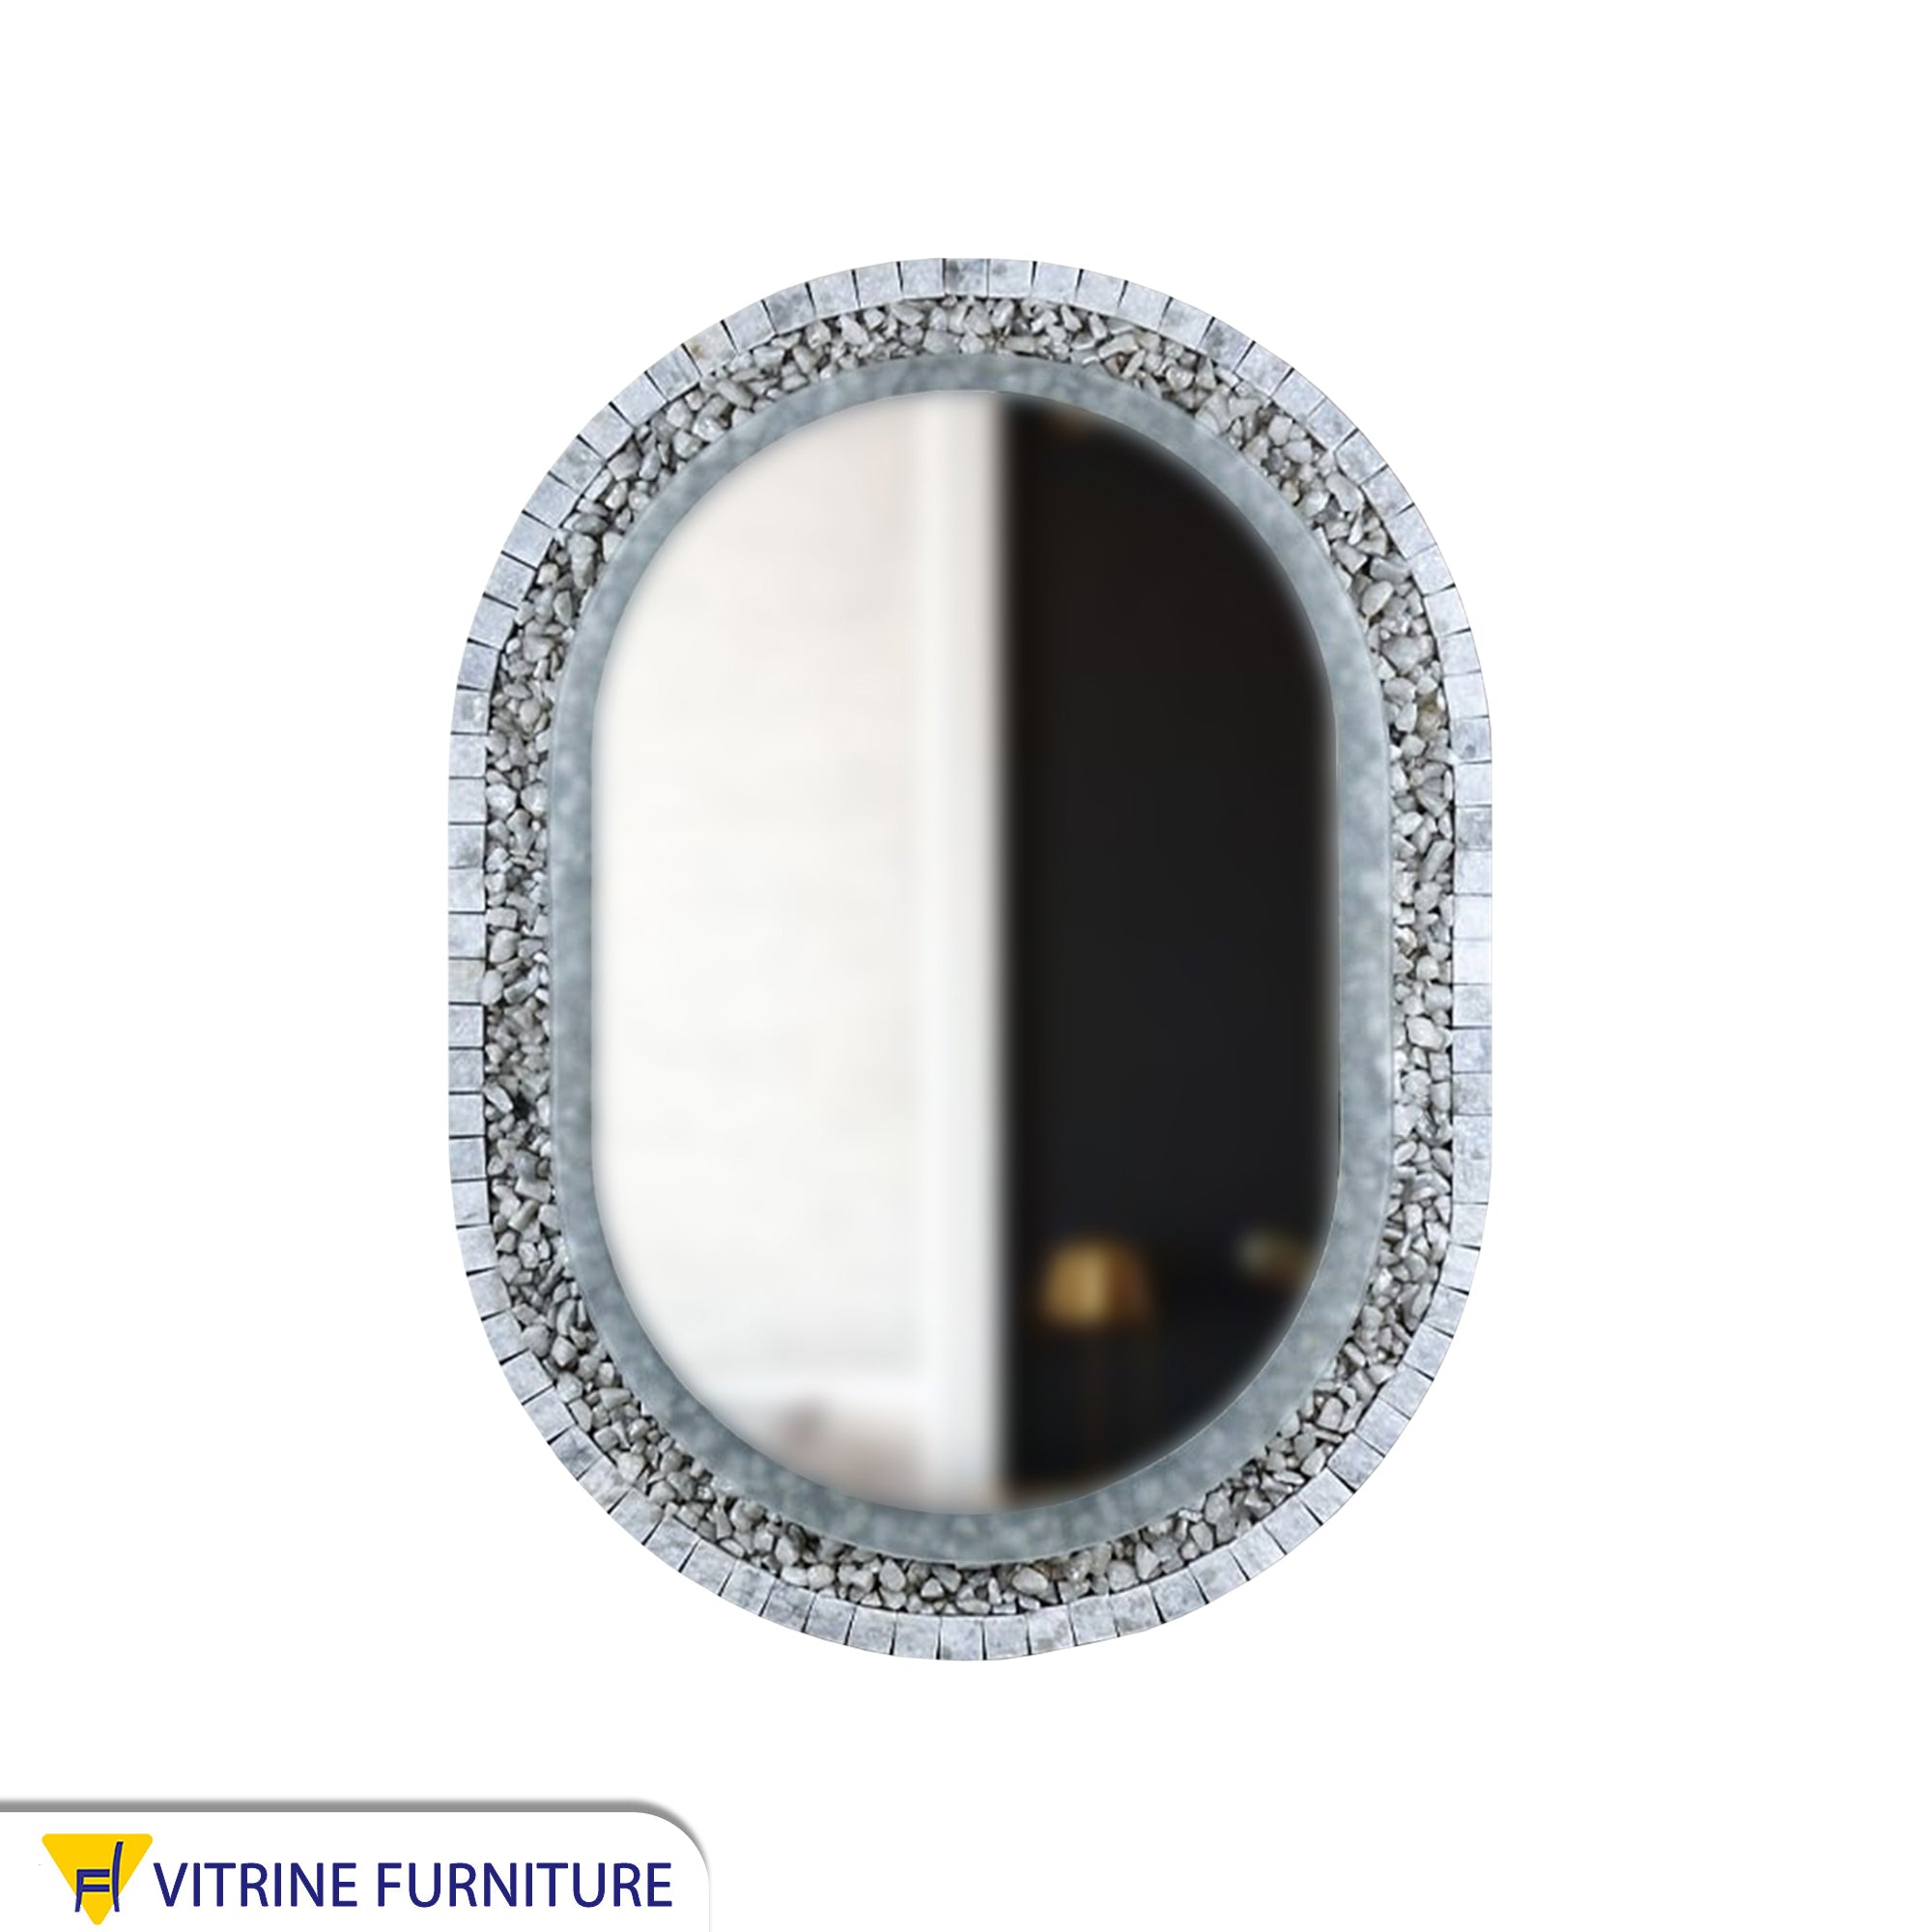 LED mirror with a silver marble and stone frame